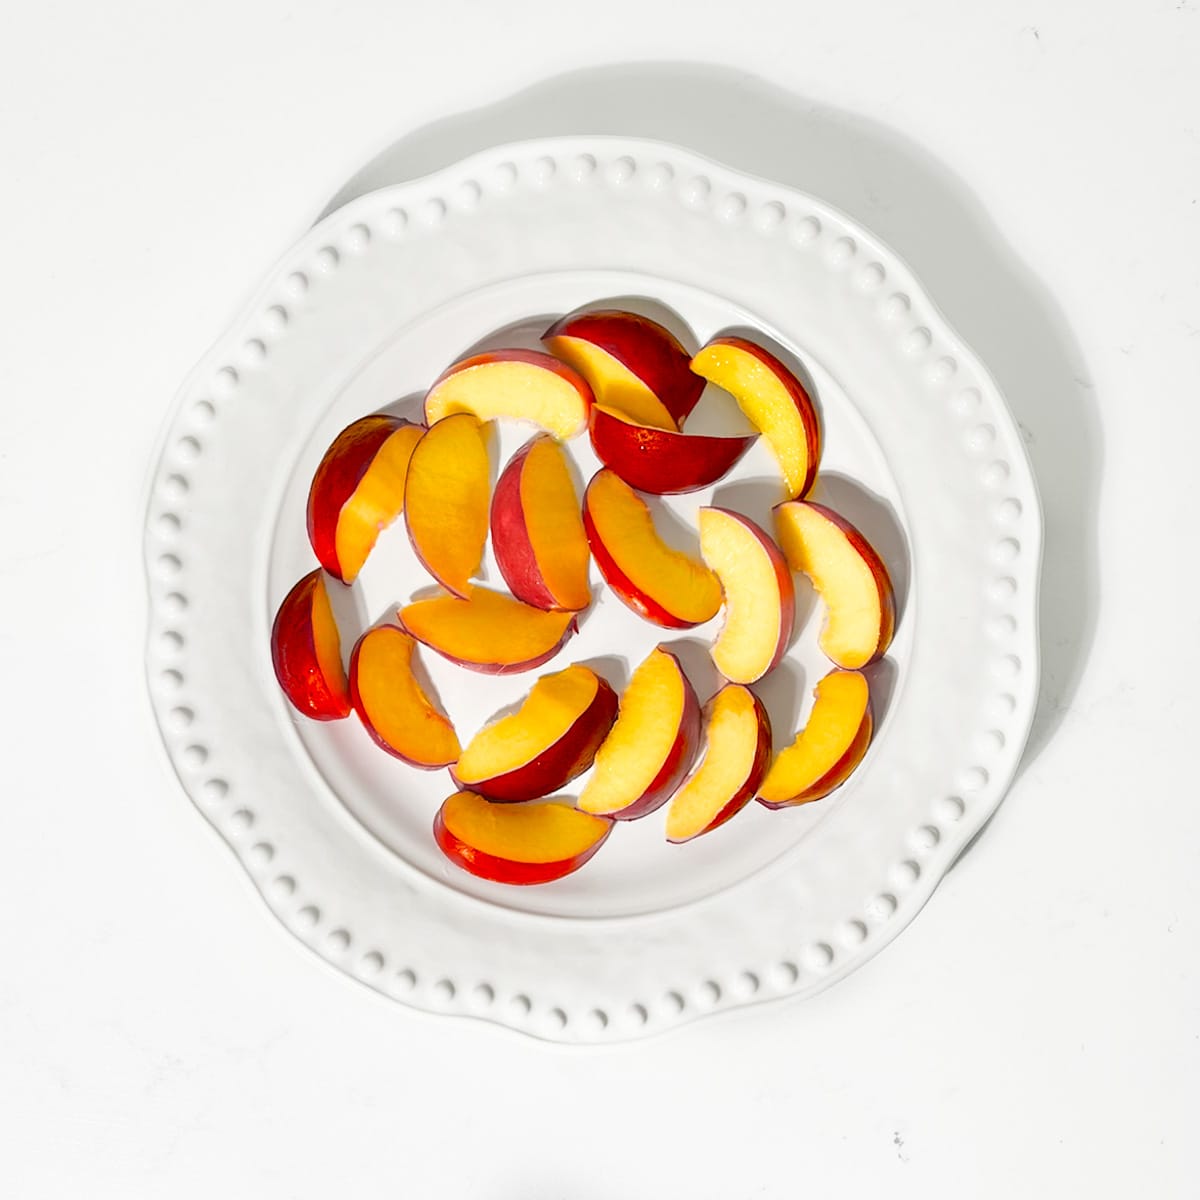 Layering nectarines on a plate for the nectarine salad.